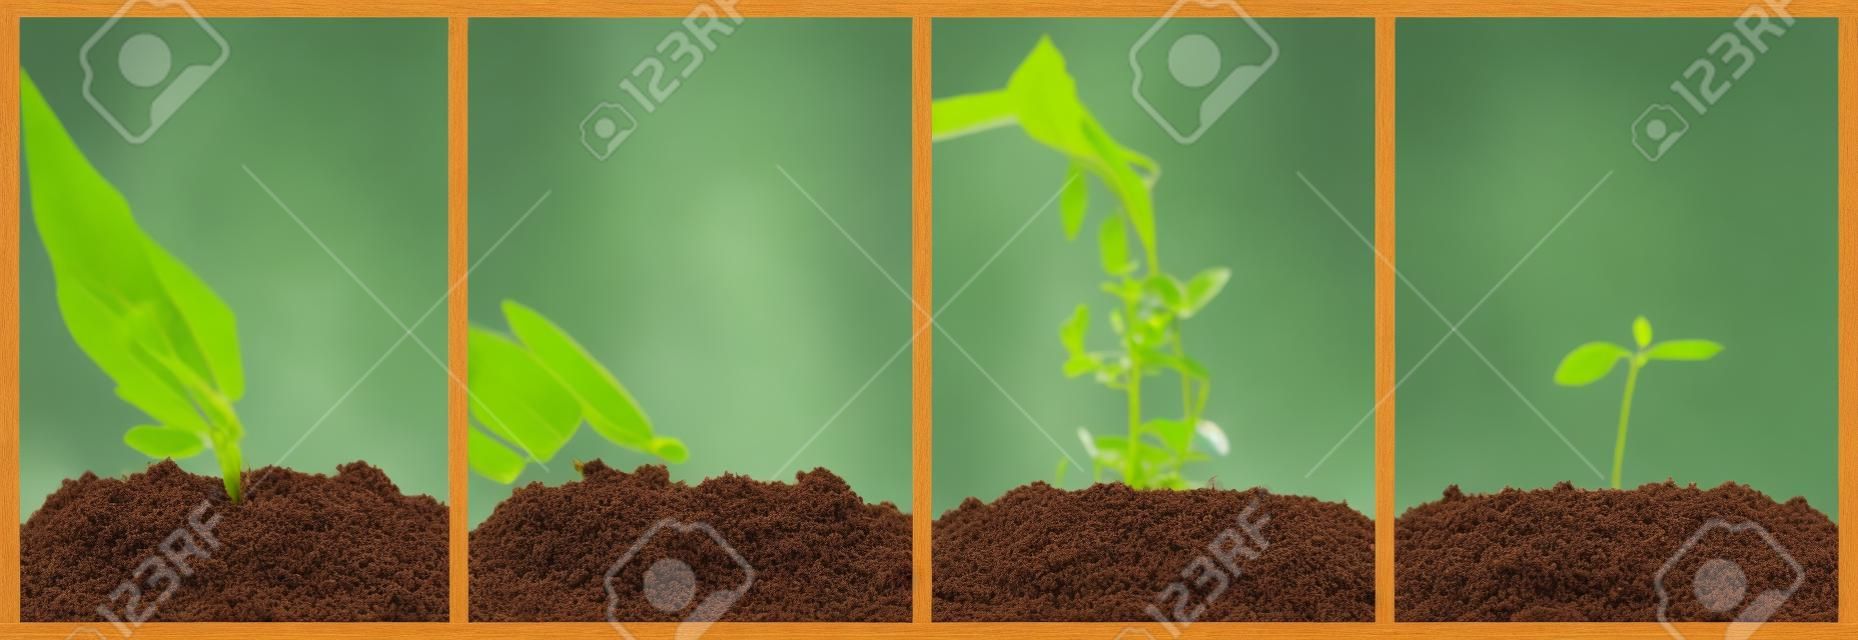 Concept of seeding and plant growing in collection